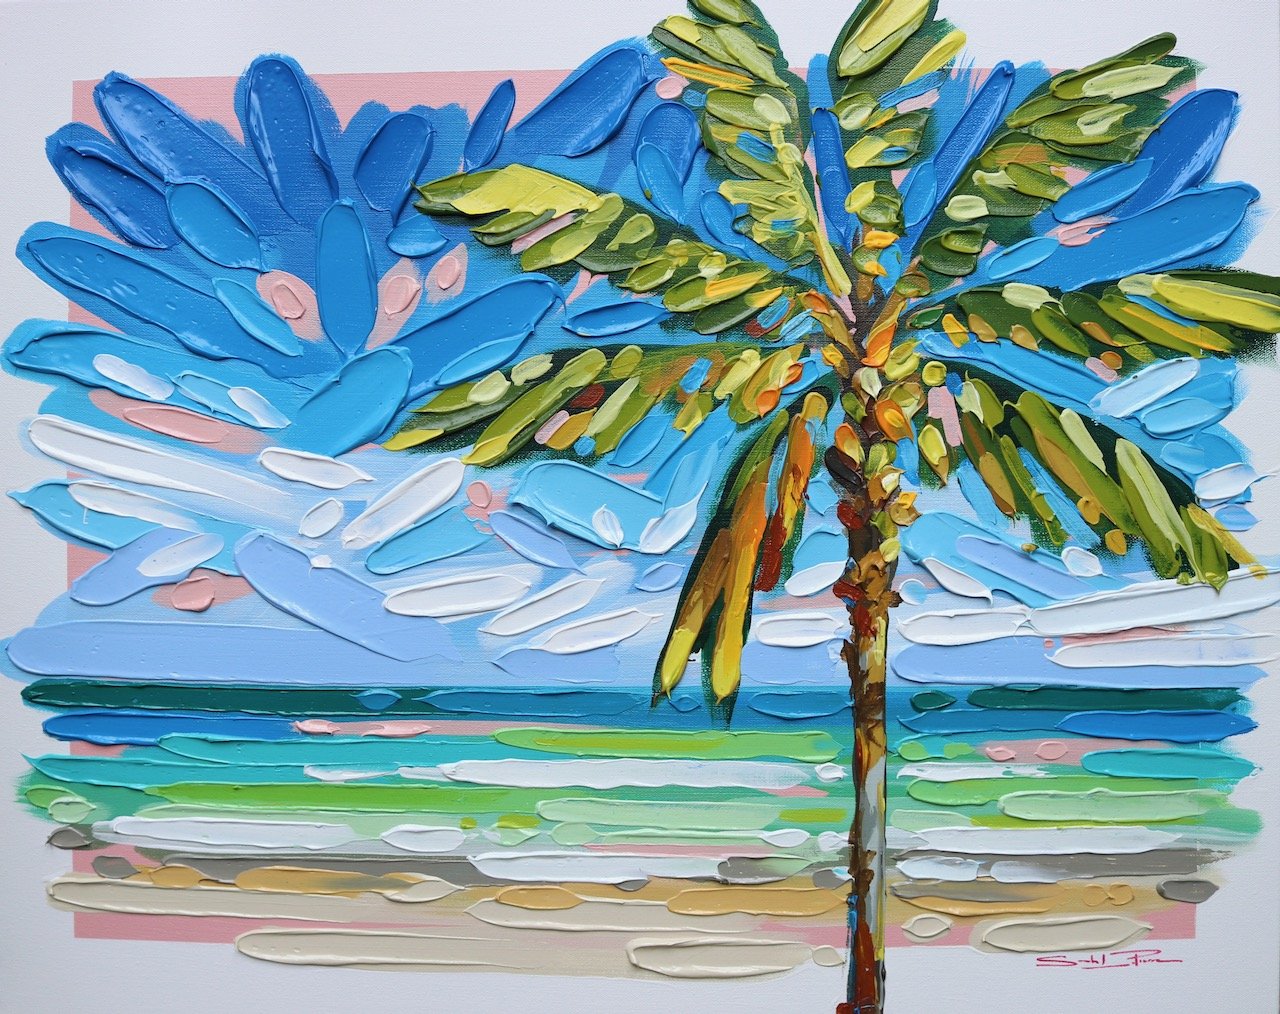 Sarah LaPierre, Escape to Paradise, 24x18, Acrylic on Gallery Wrapped Canvas, $900 (1).jpeg